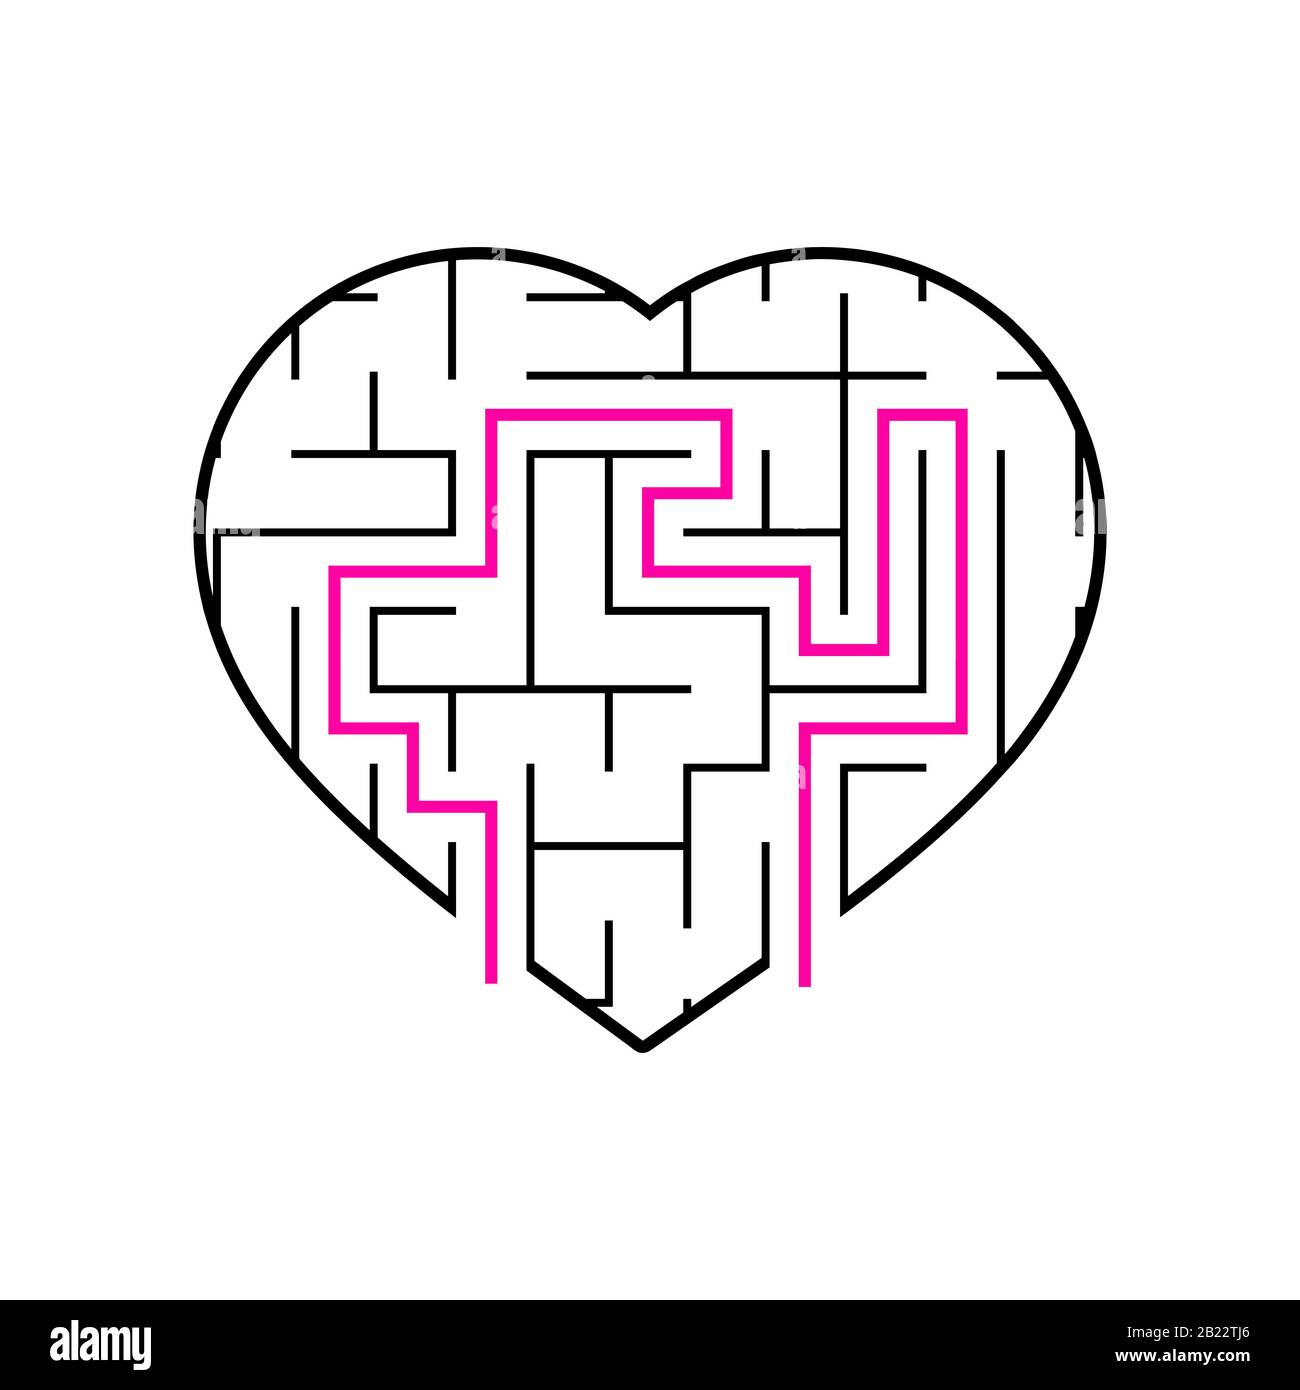 Labyrinth with a black stroke. Lovely heart. A game for children. Simple flat vector illustration isolated on white background. With the answer Stock Vector